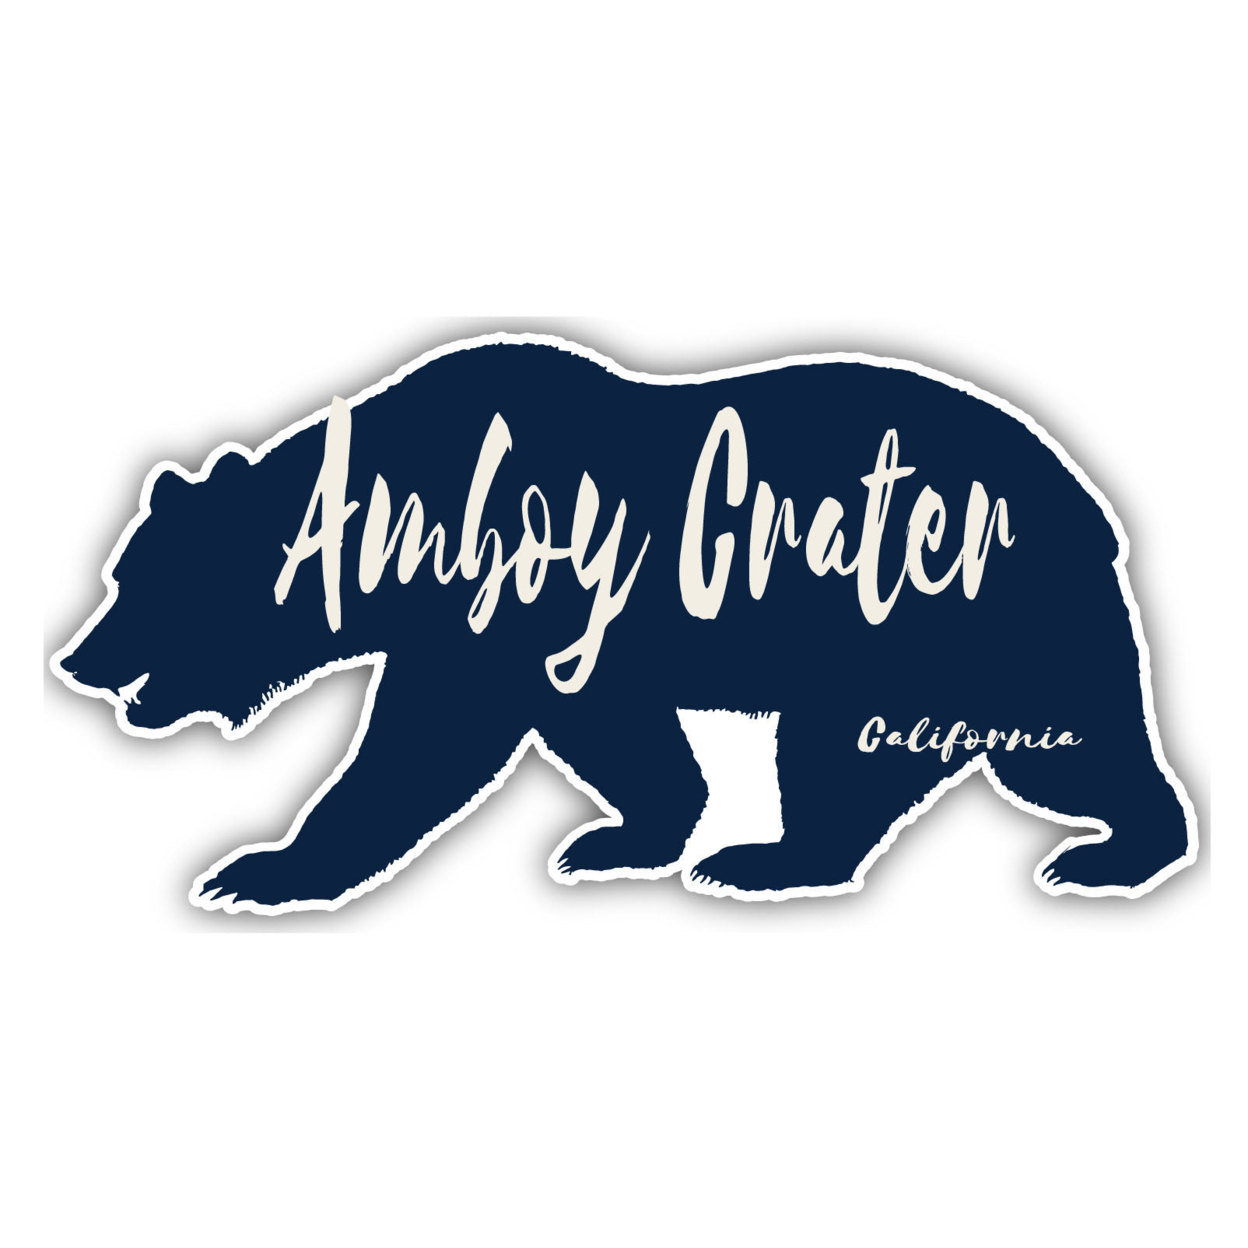 Amboy Crater California Souvenir Decorative Stickers (Choose Theme And Size) - 4-Pack, 6-Inch, Bear